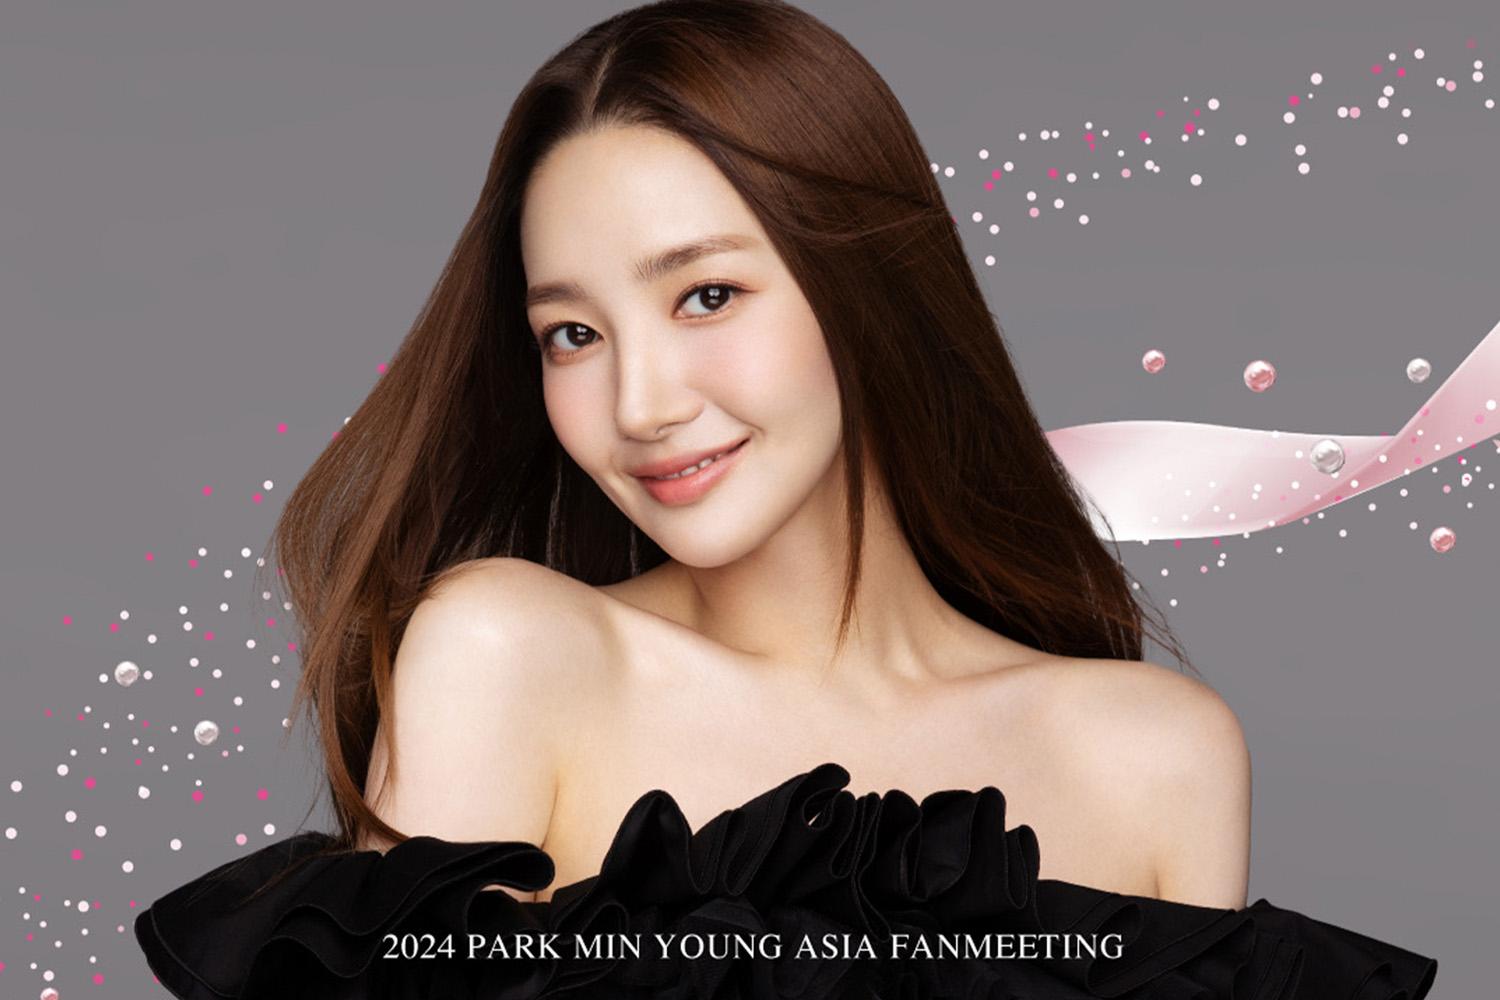 park-min-young-asia-fanmeeting-in-thailand-2024-SPACEBAR-Hero.jpg